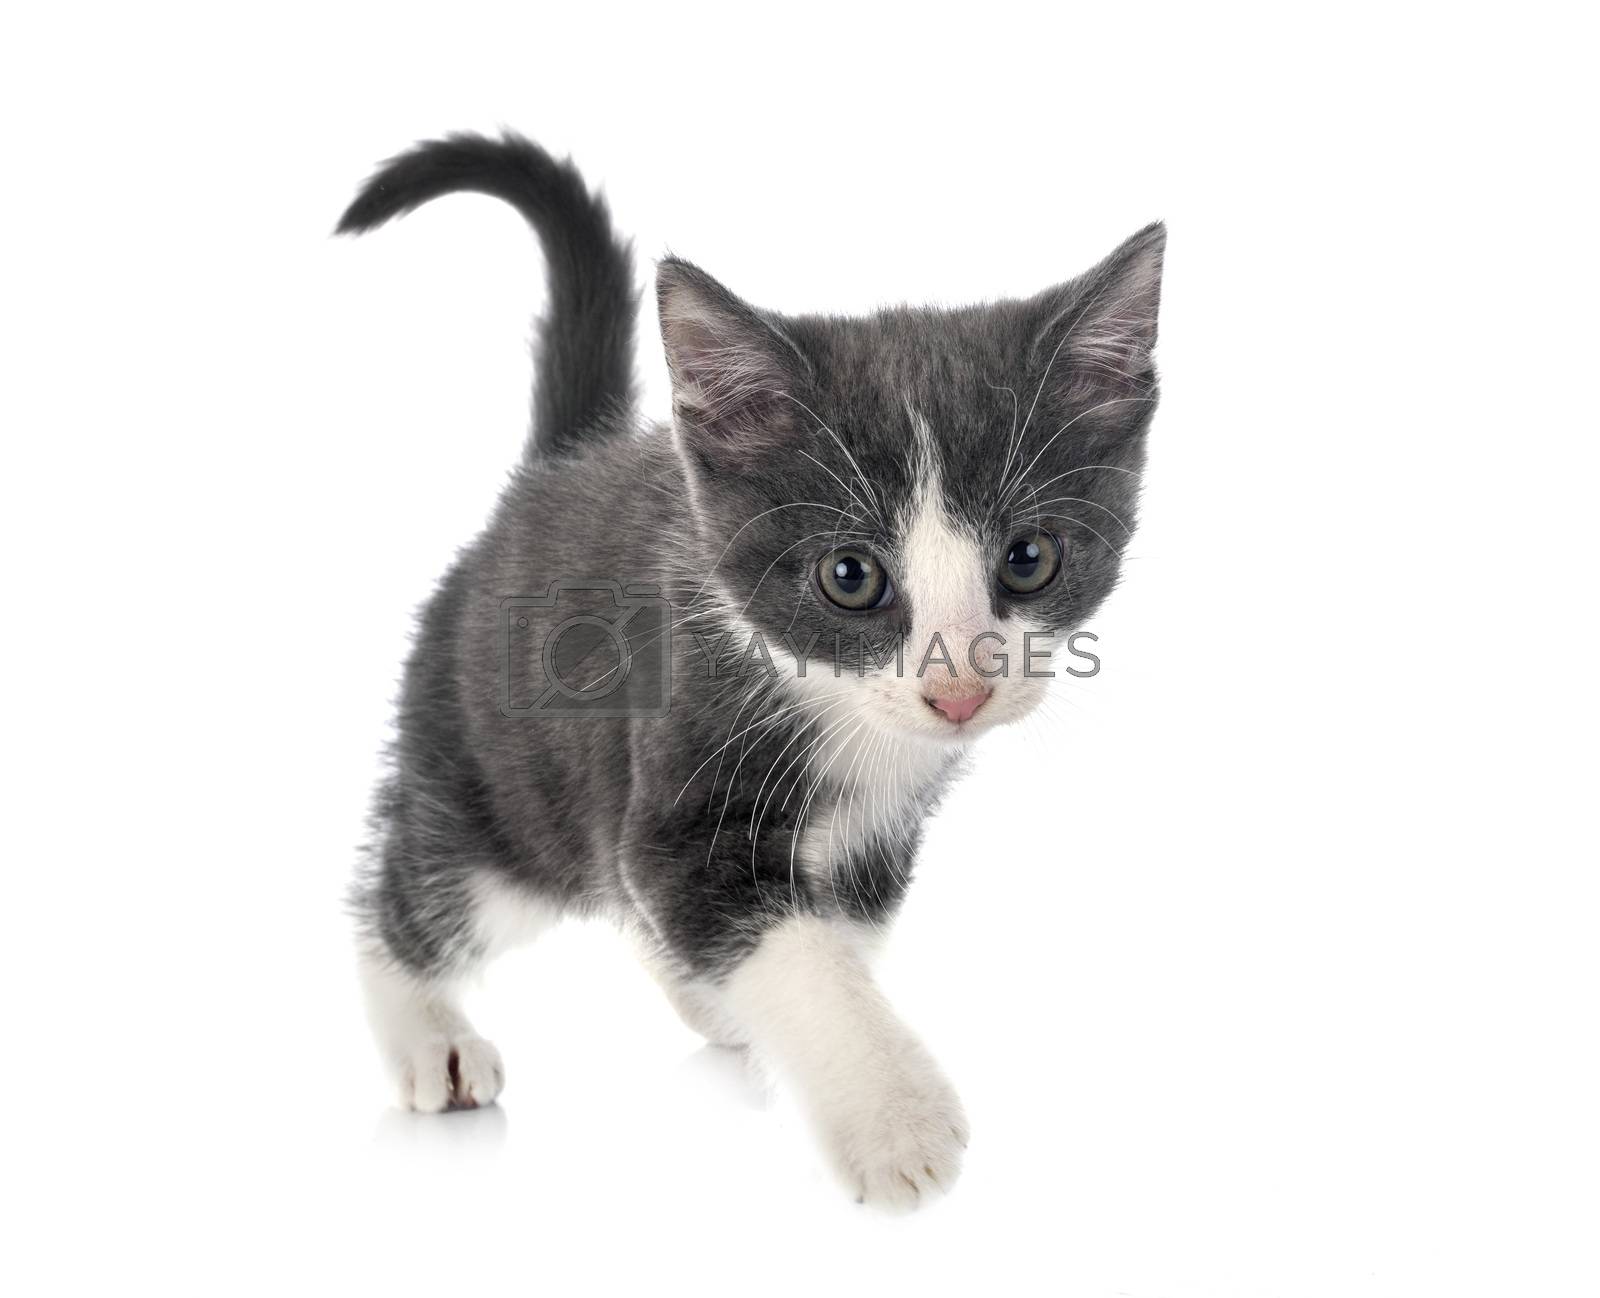 Royalty free image of kitten in studio by cynoclub